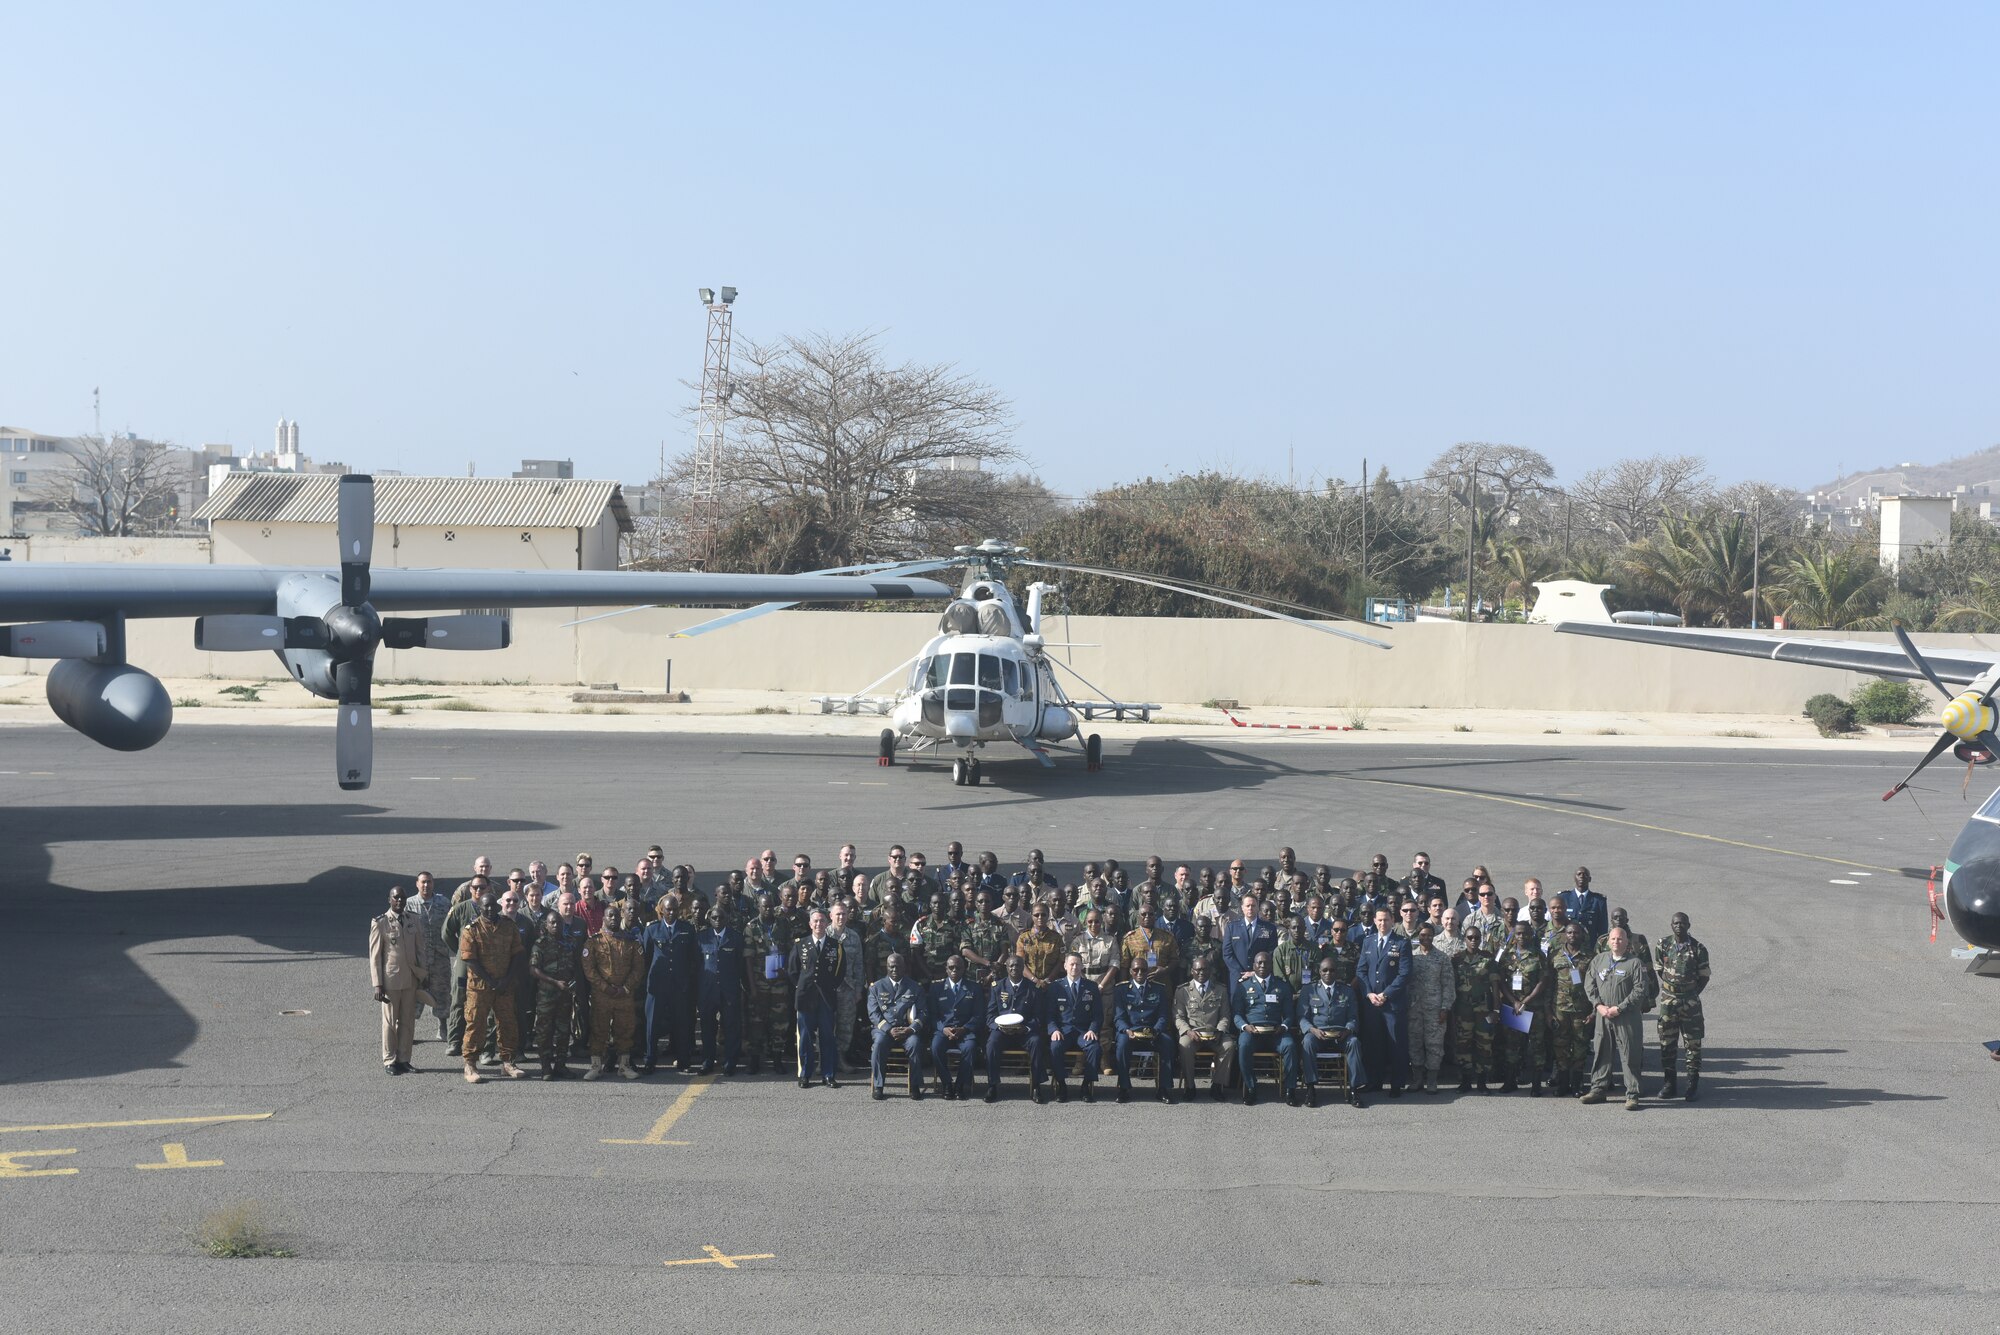 Participants of African Partnership Flight Senegal pose for a photo after the opening ceremony of the week-long aviation engagement at Captain Andalla Cissé Air Base, Senegal, March 19, 2018. Ten nations are participating in this event, which will focus on casualty evacuation, aeromedical evacuation, as well as air and ground safety. (U.S. Air Force photo by Airman 1st Class Eli Chevalier)